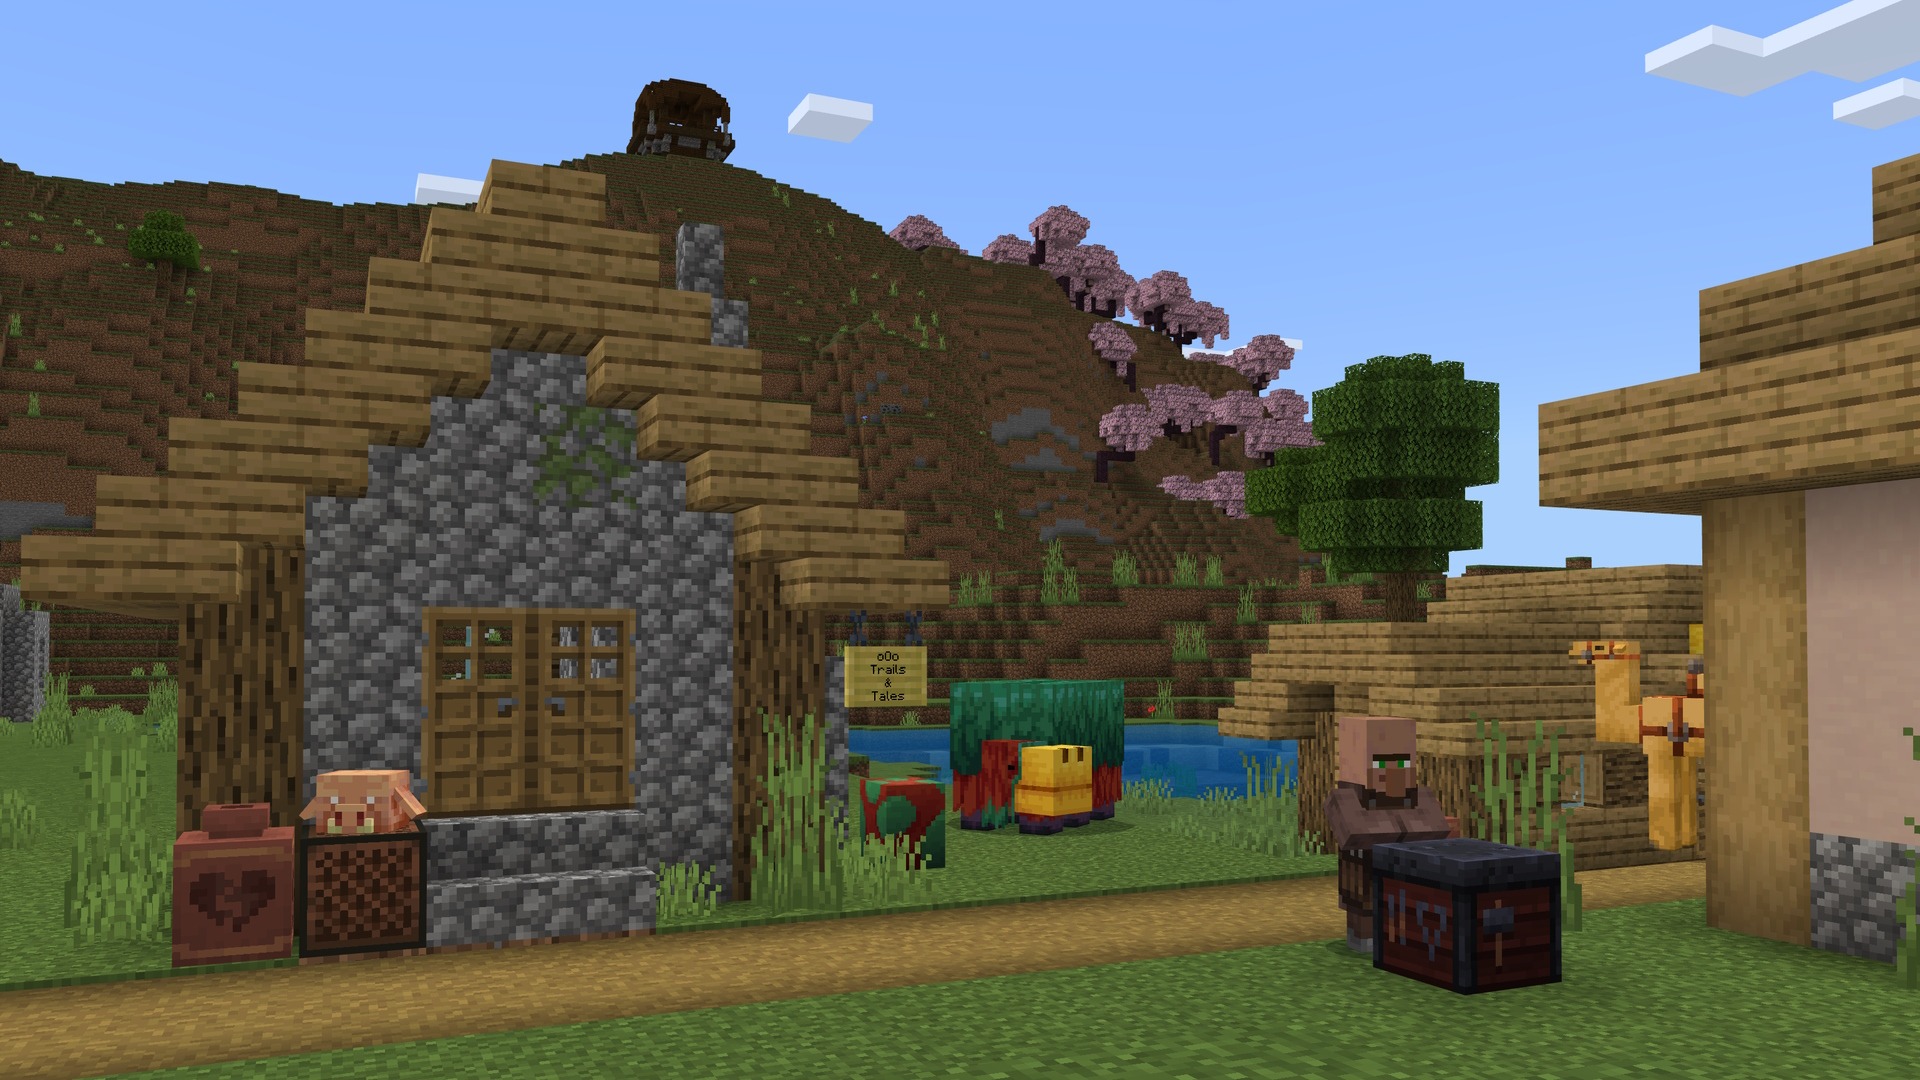 A Minecraft screenshot featuring a village, villager, sniffer, with a cherry grove and pillager outpost on the side of a mountain in the background.